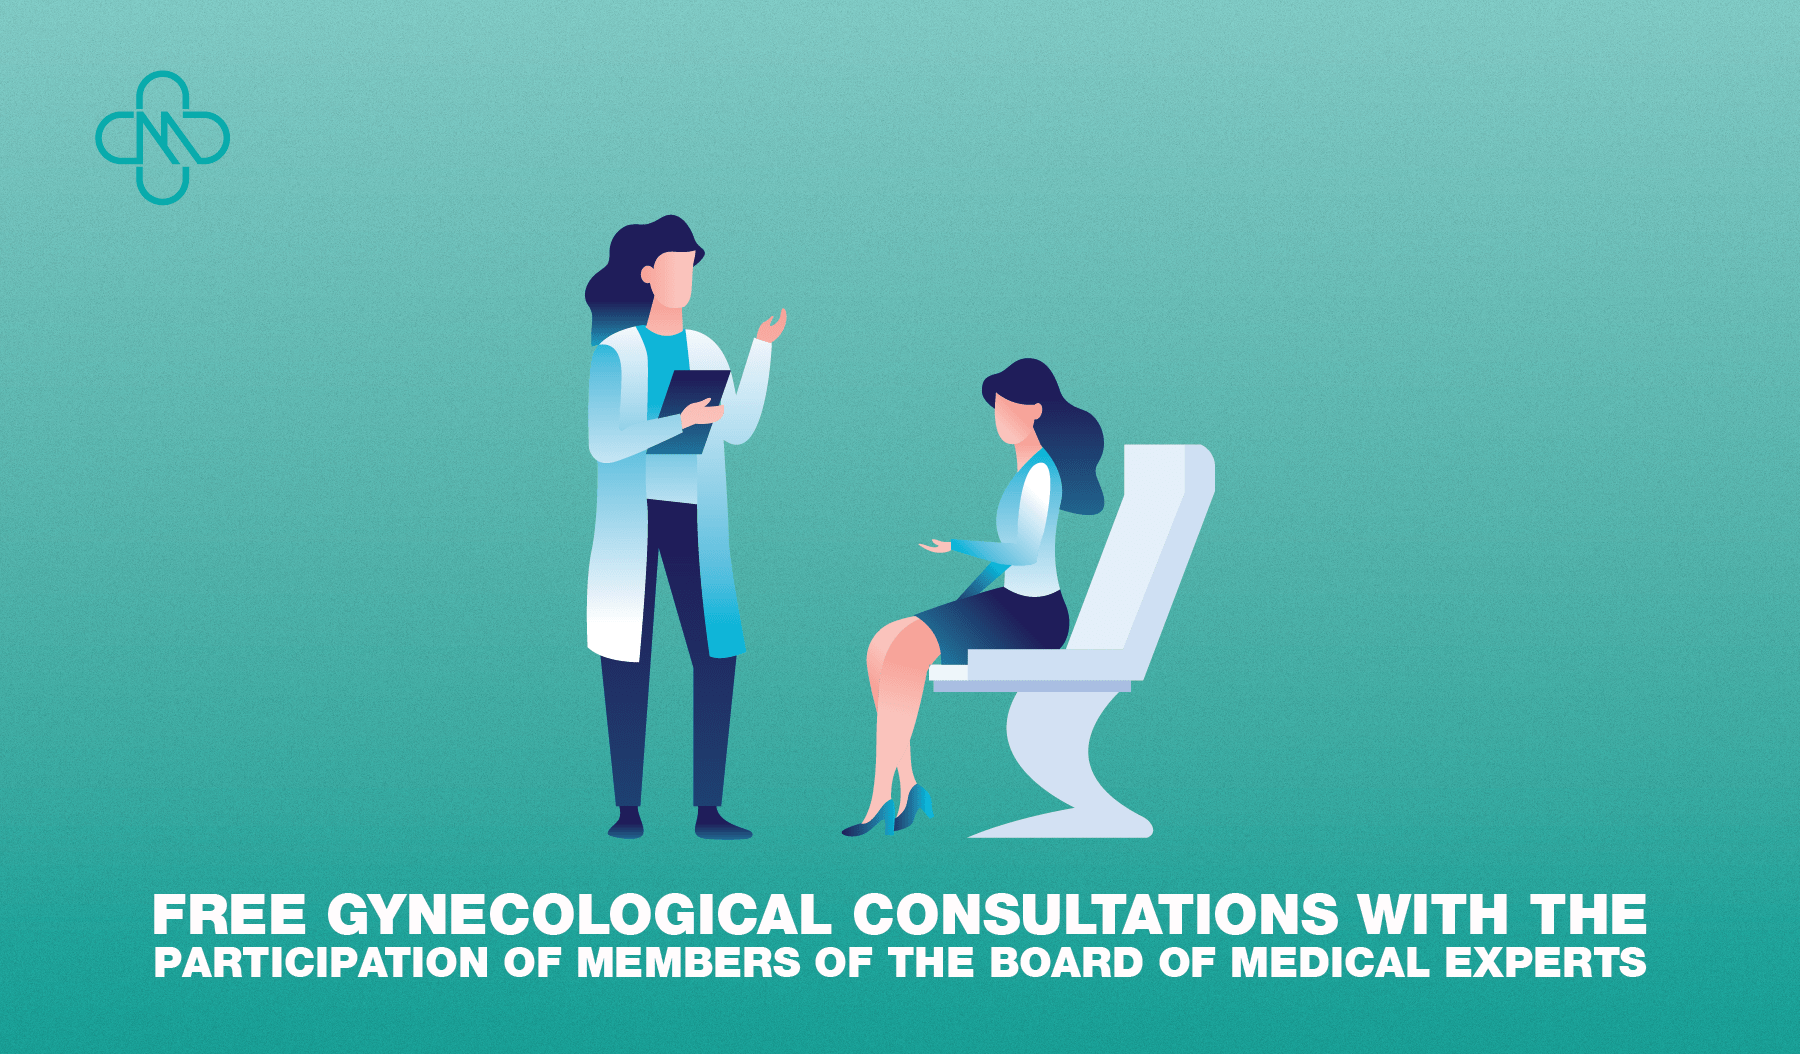 Free gynecological consultations with the participation of members of the board of medical experts